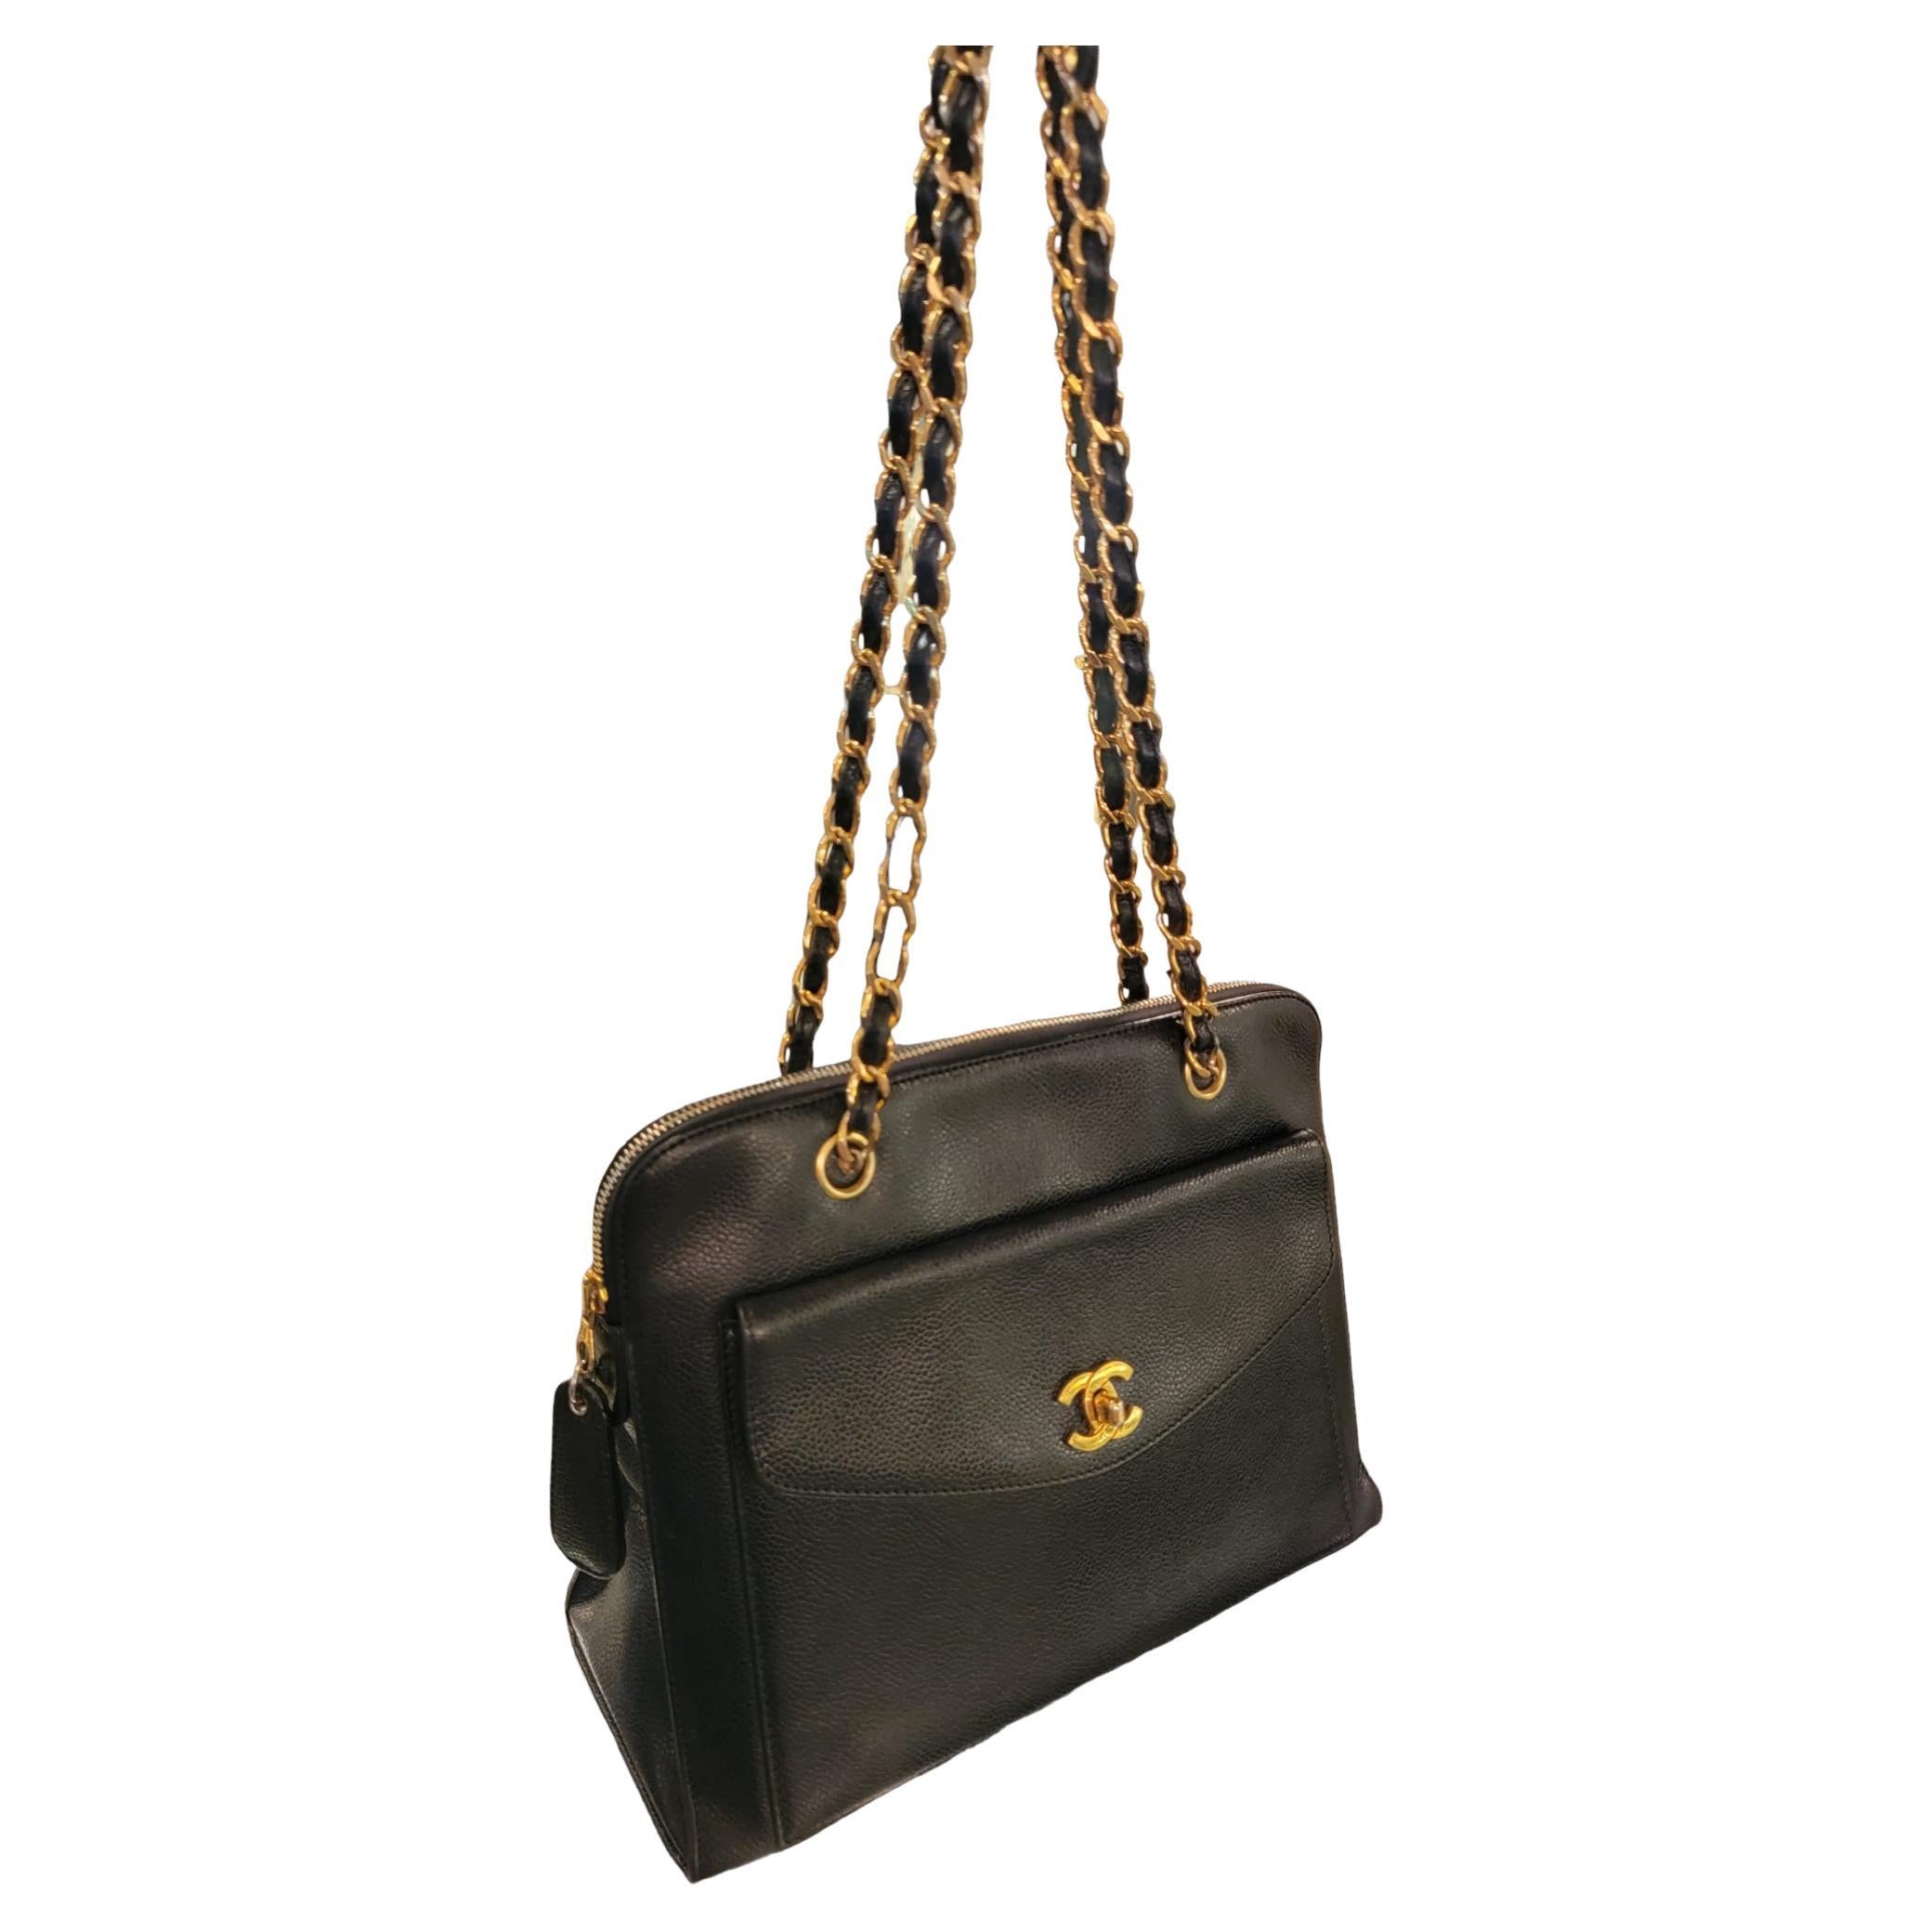 CHANEL Black Caviar Skin Leather Shoulder Bag With beautiful gold CC buckle accents on the front Of the bag. When opened exposes the exterior compartment. The caviar leather is used thorough he entire bag. The zipper enclosure has a hanging caviar